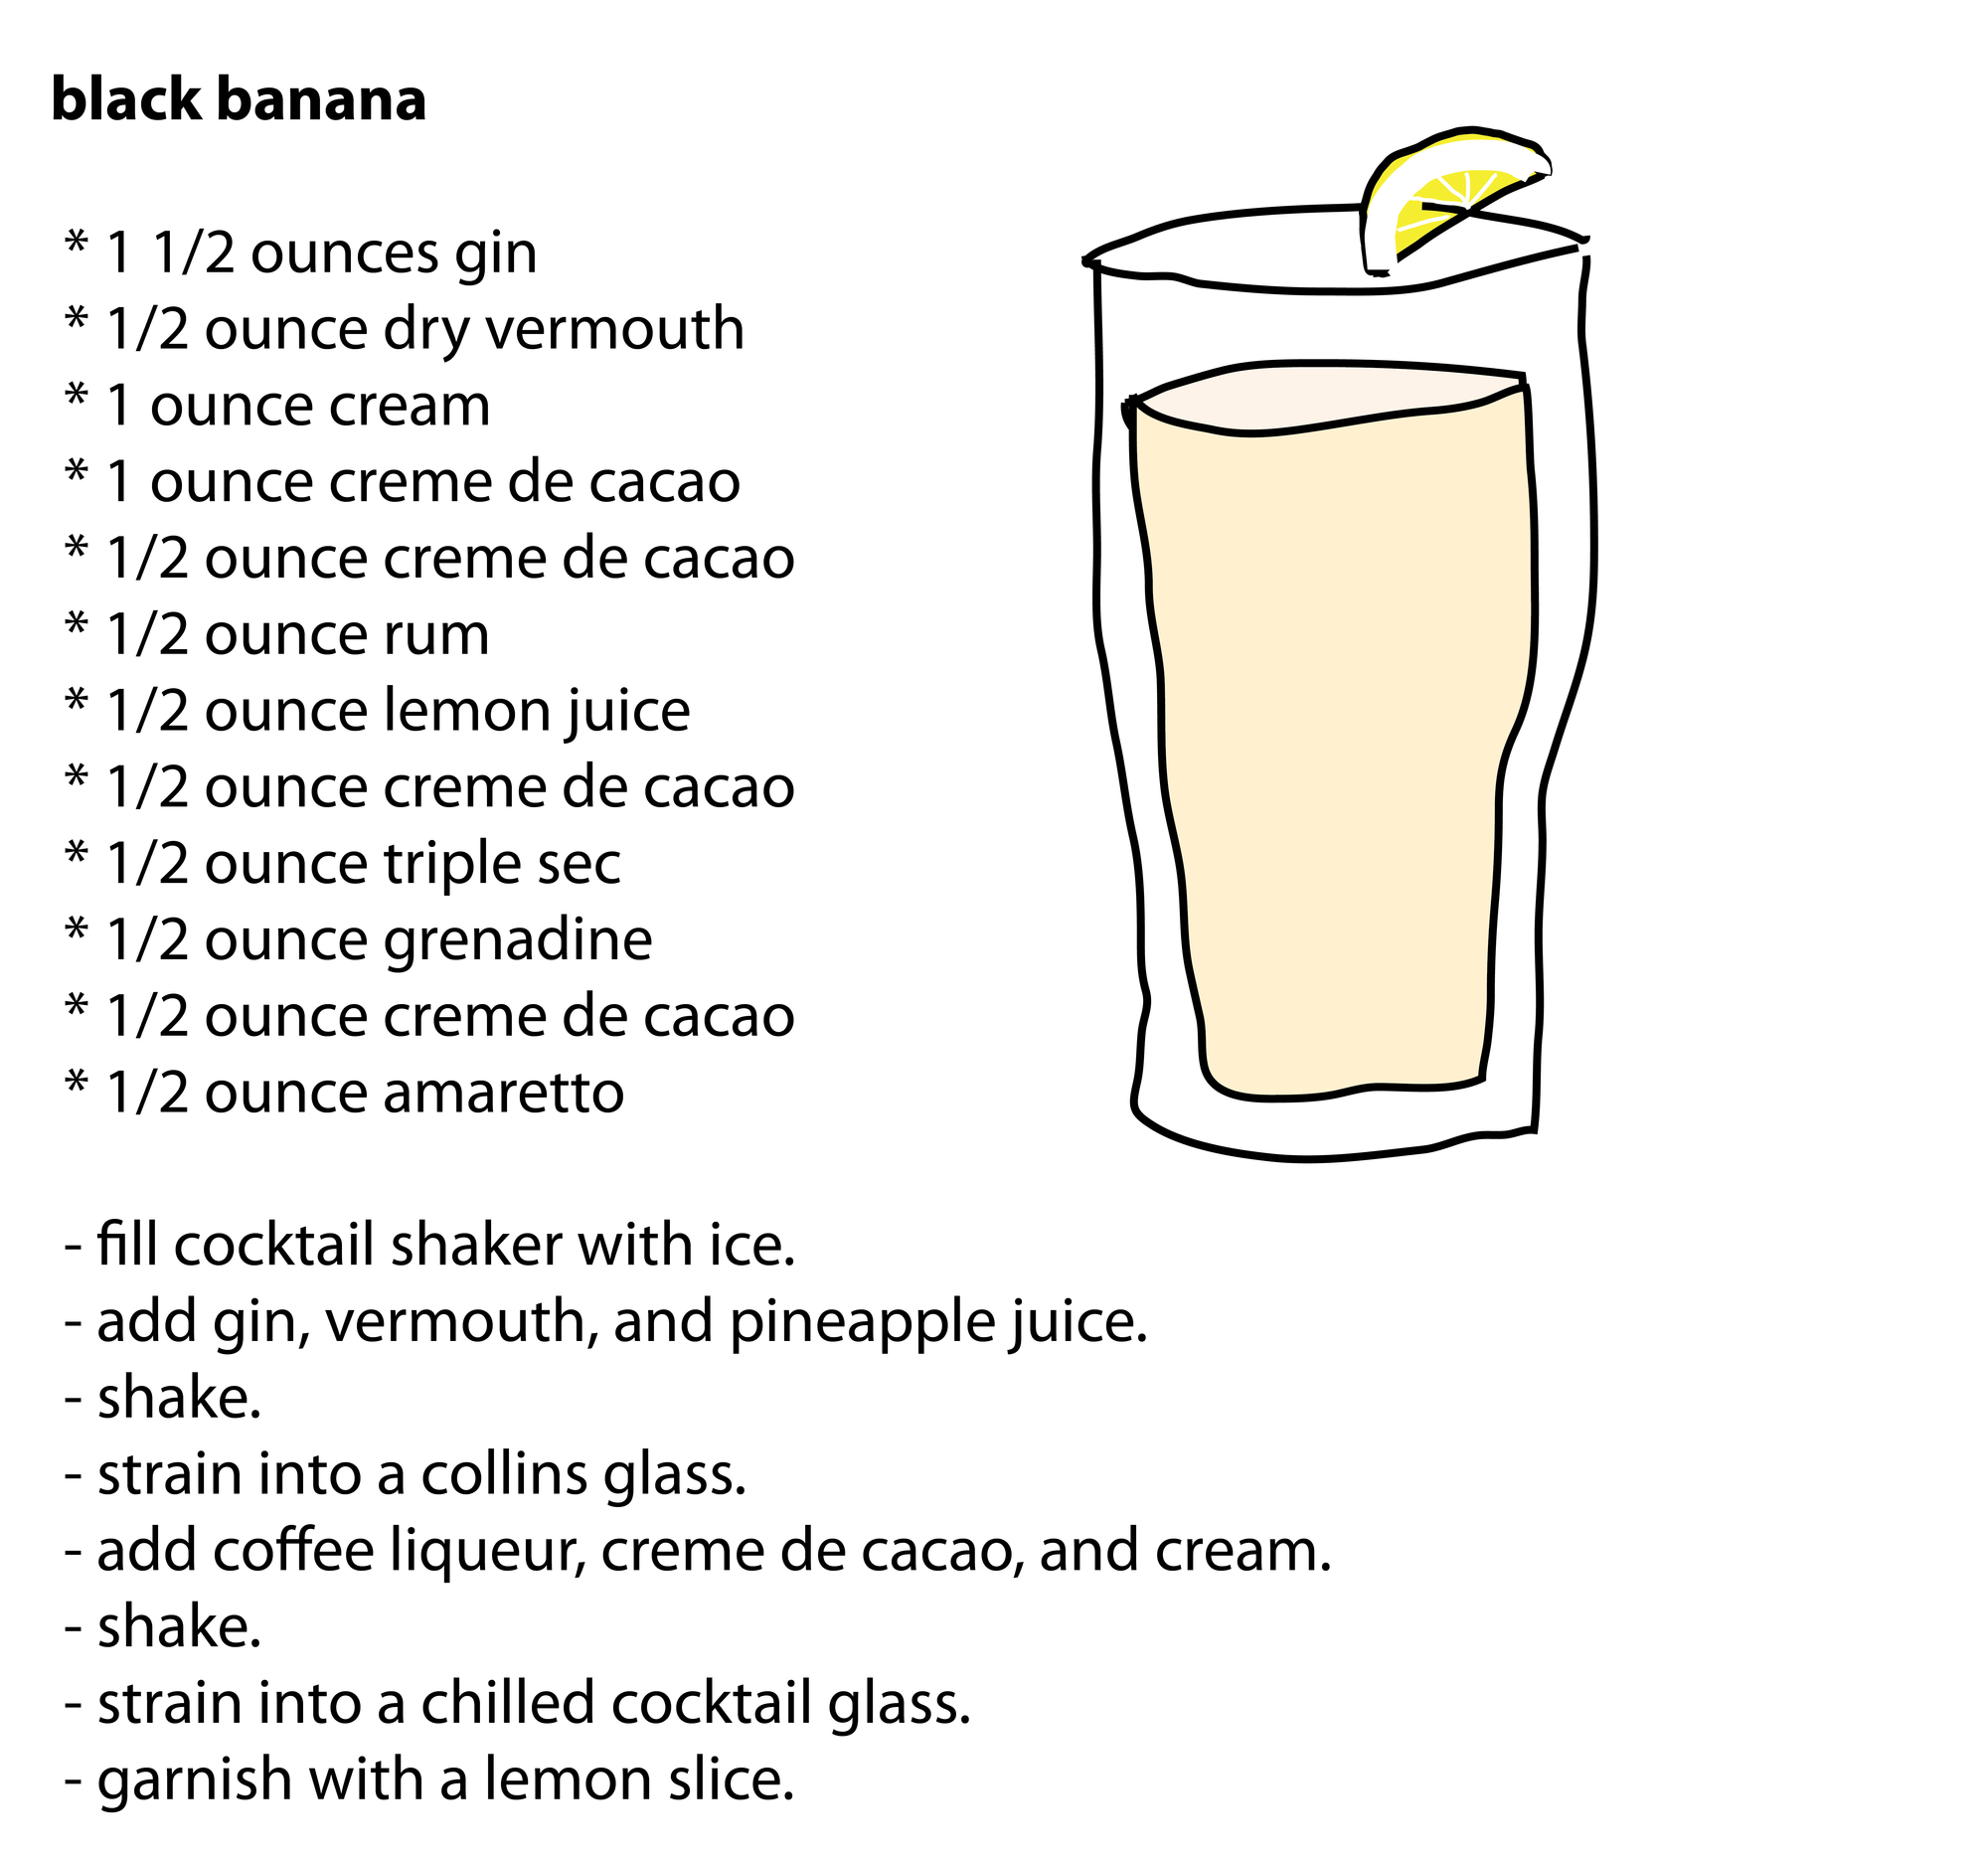 black banana     * 1 1/2 ounces gin  * 1/2 ounce dry vermouth  * 1 ounce cream  * 1 ounce creme de cacao  * 1/2 ounce creme de cacao  * 1/2 ounce rum  * 1/2 ounce lemon juice  * 1/2 ounce creme de cacao  * 1/2 ounce triple sec  * 1/2 ounce grenadine  * 1/2 ounce creme de cacao  * 1/2 ounce amaretto   - fill cocktail shaker with ice.  - add gin, vermouth, and pineapple juice.  - shake.  - strain into a collins glass.  - add coffee liqueur, creme de cacao, and cream.  - shake.  - strain into a chilled cocktail glass.  - garnish with a lemon slice.